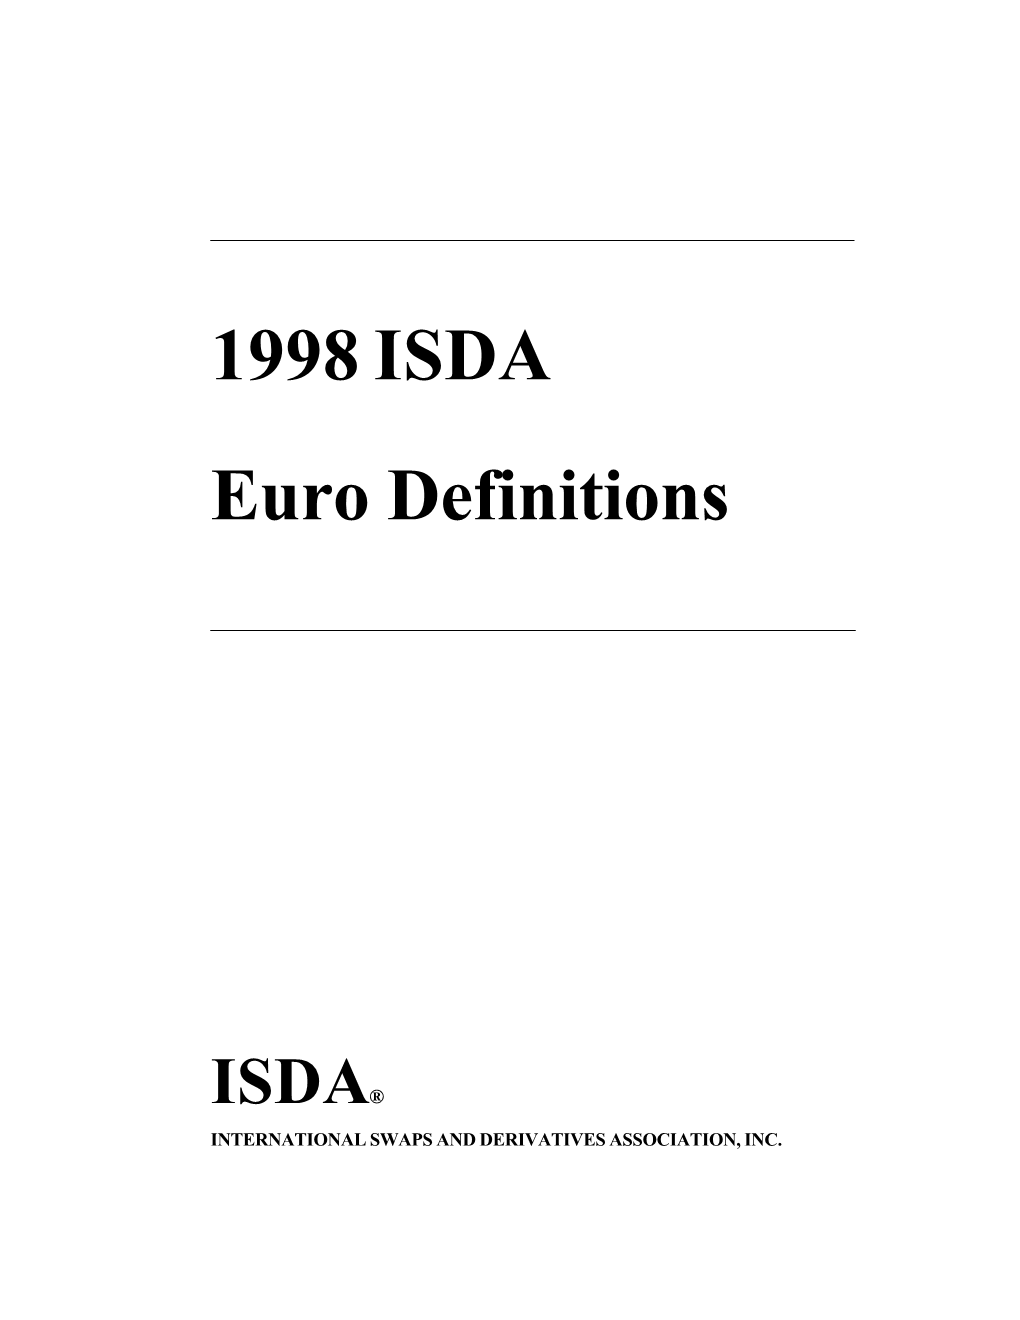 1998 ISDA Euro Definitions